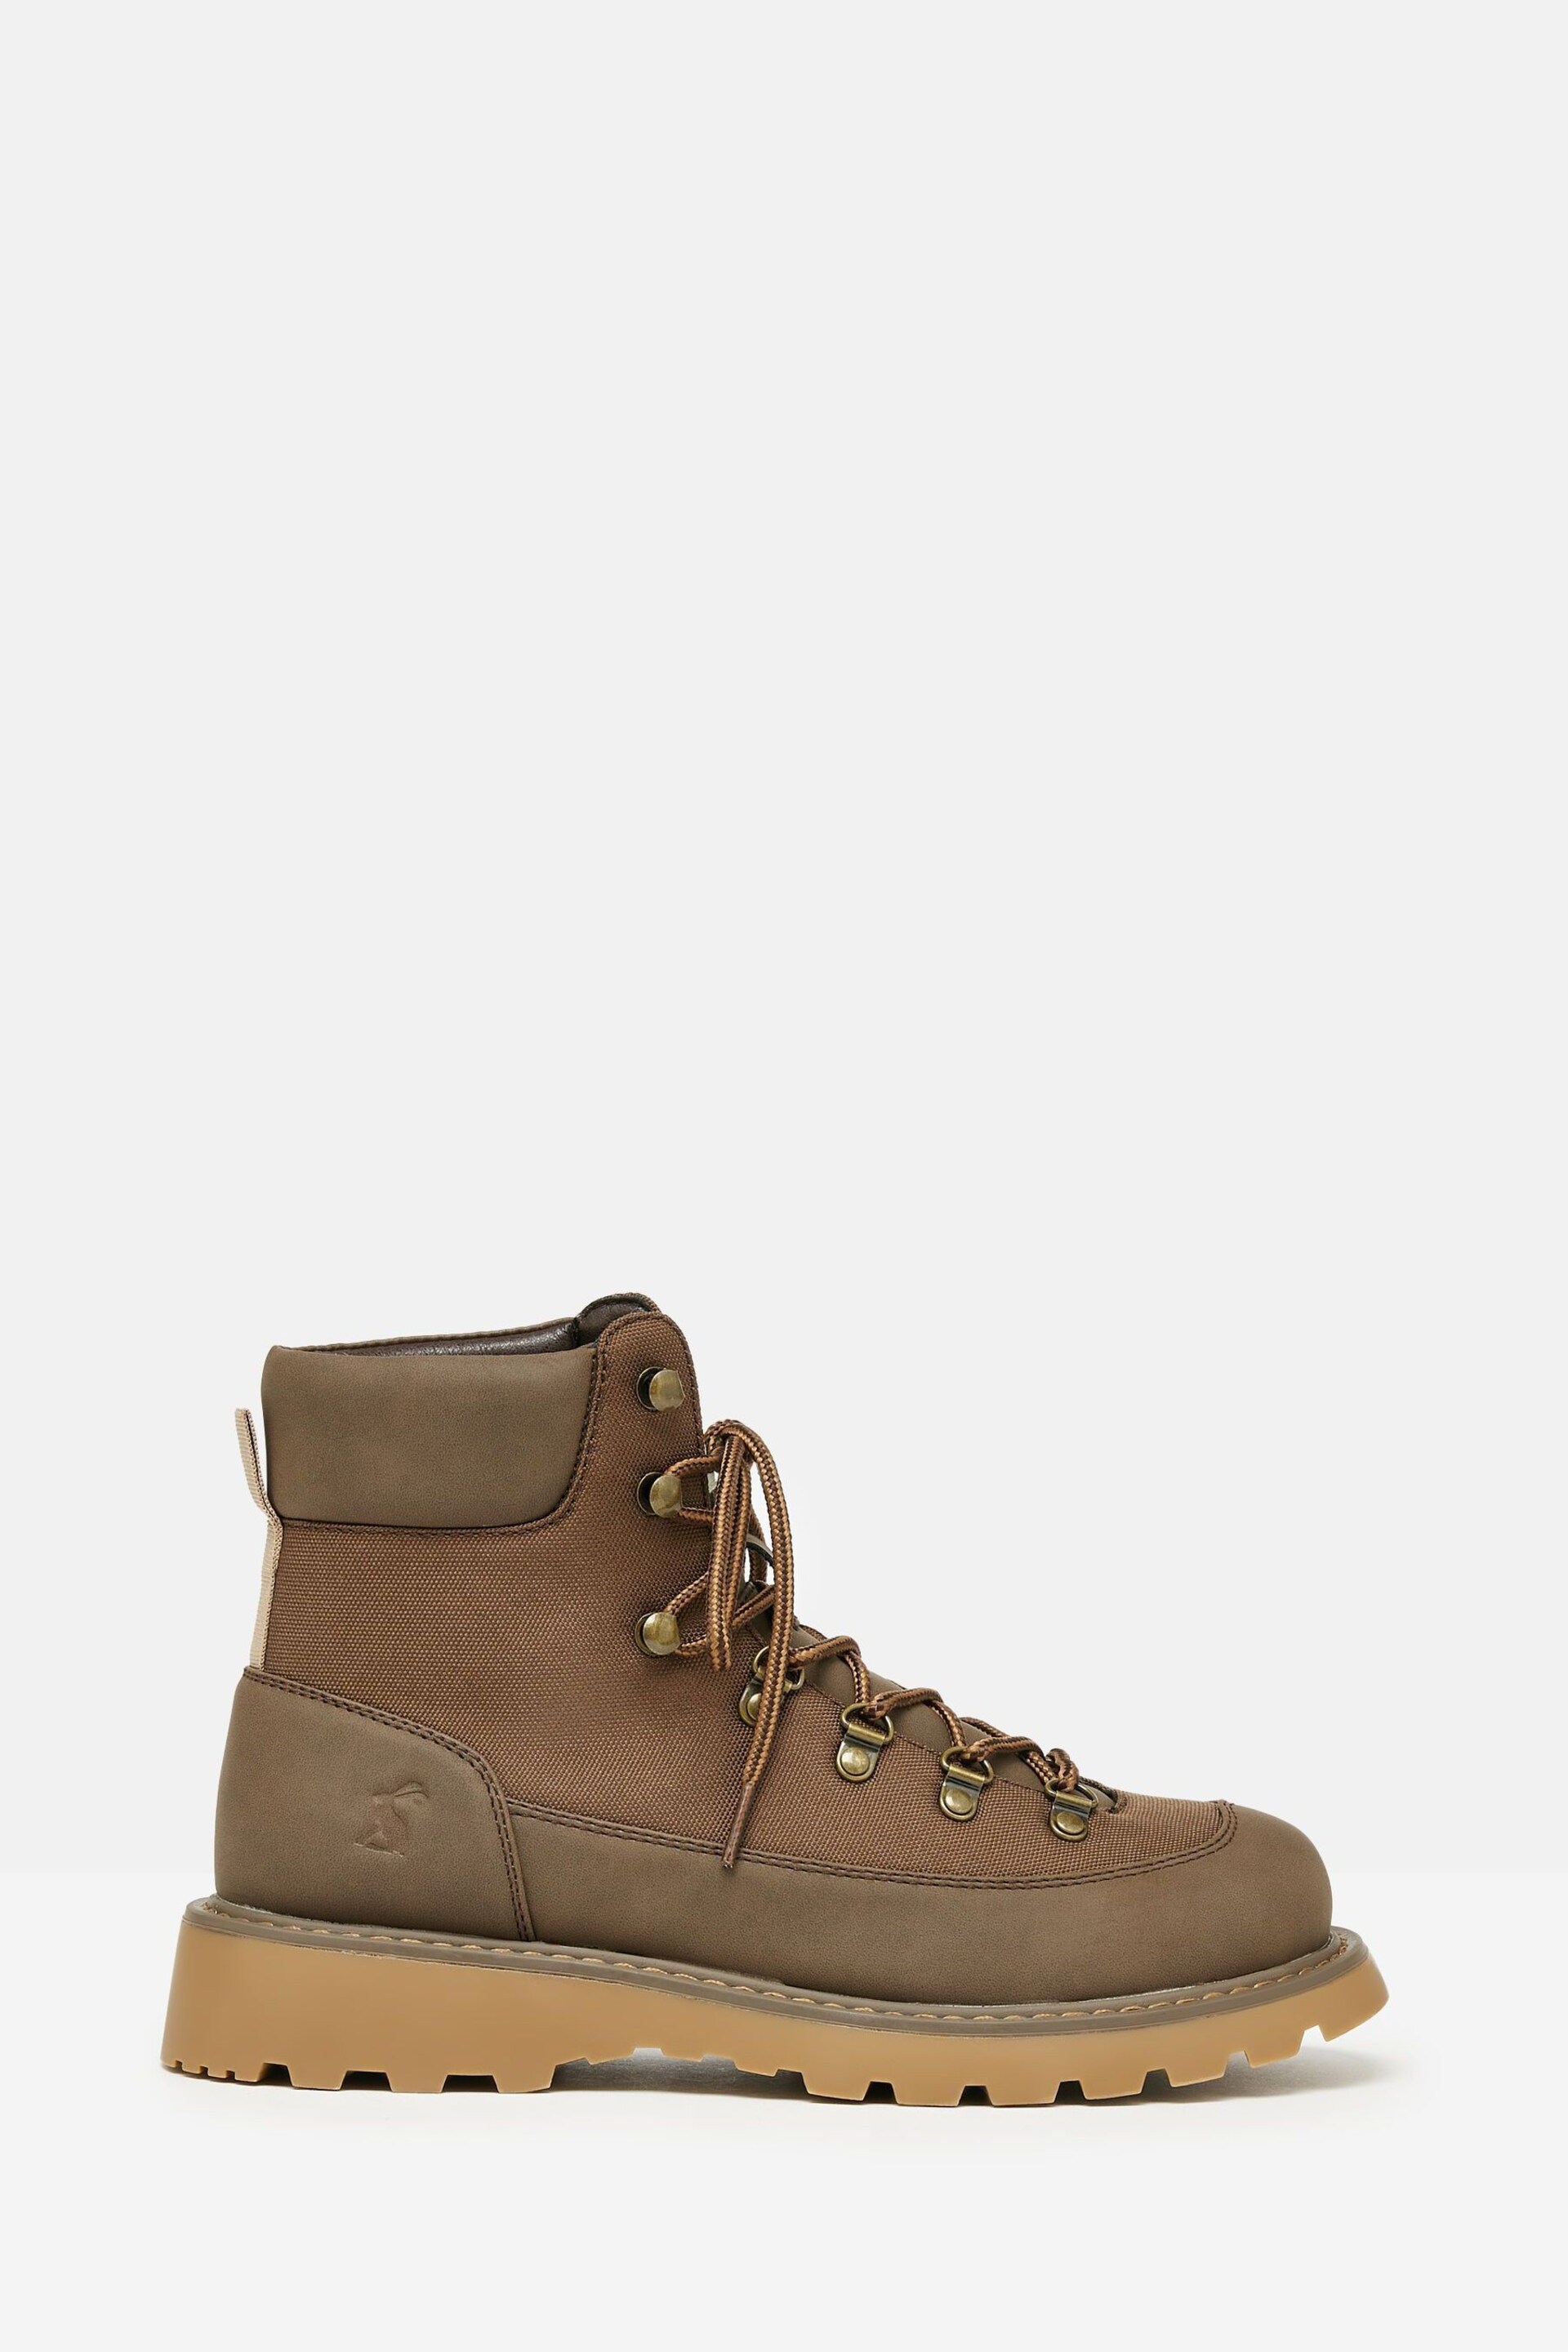 Joules Kendall Chocolate Brown Lace-Up Boots - Image 1 of 7